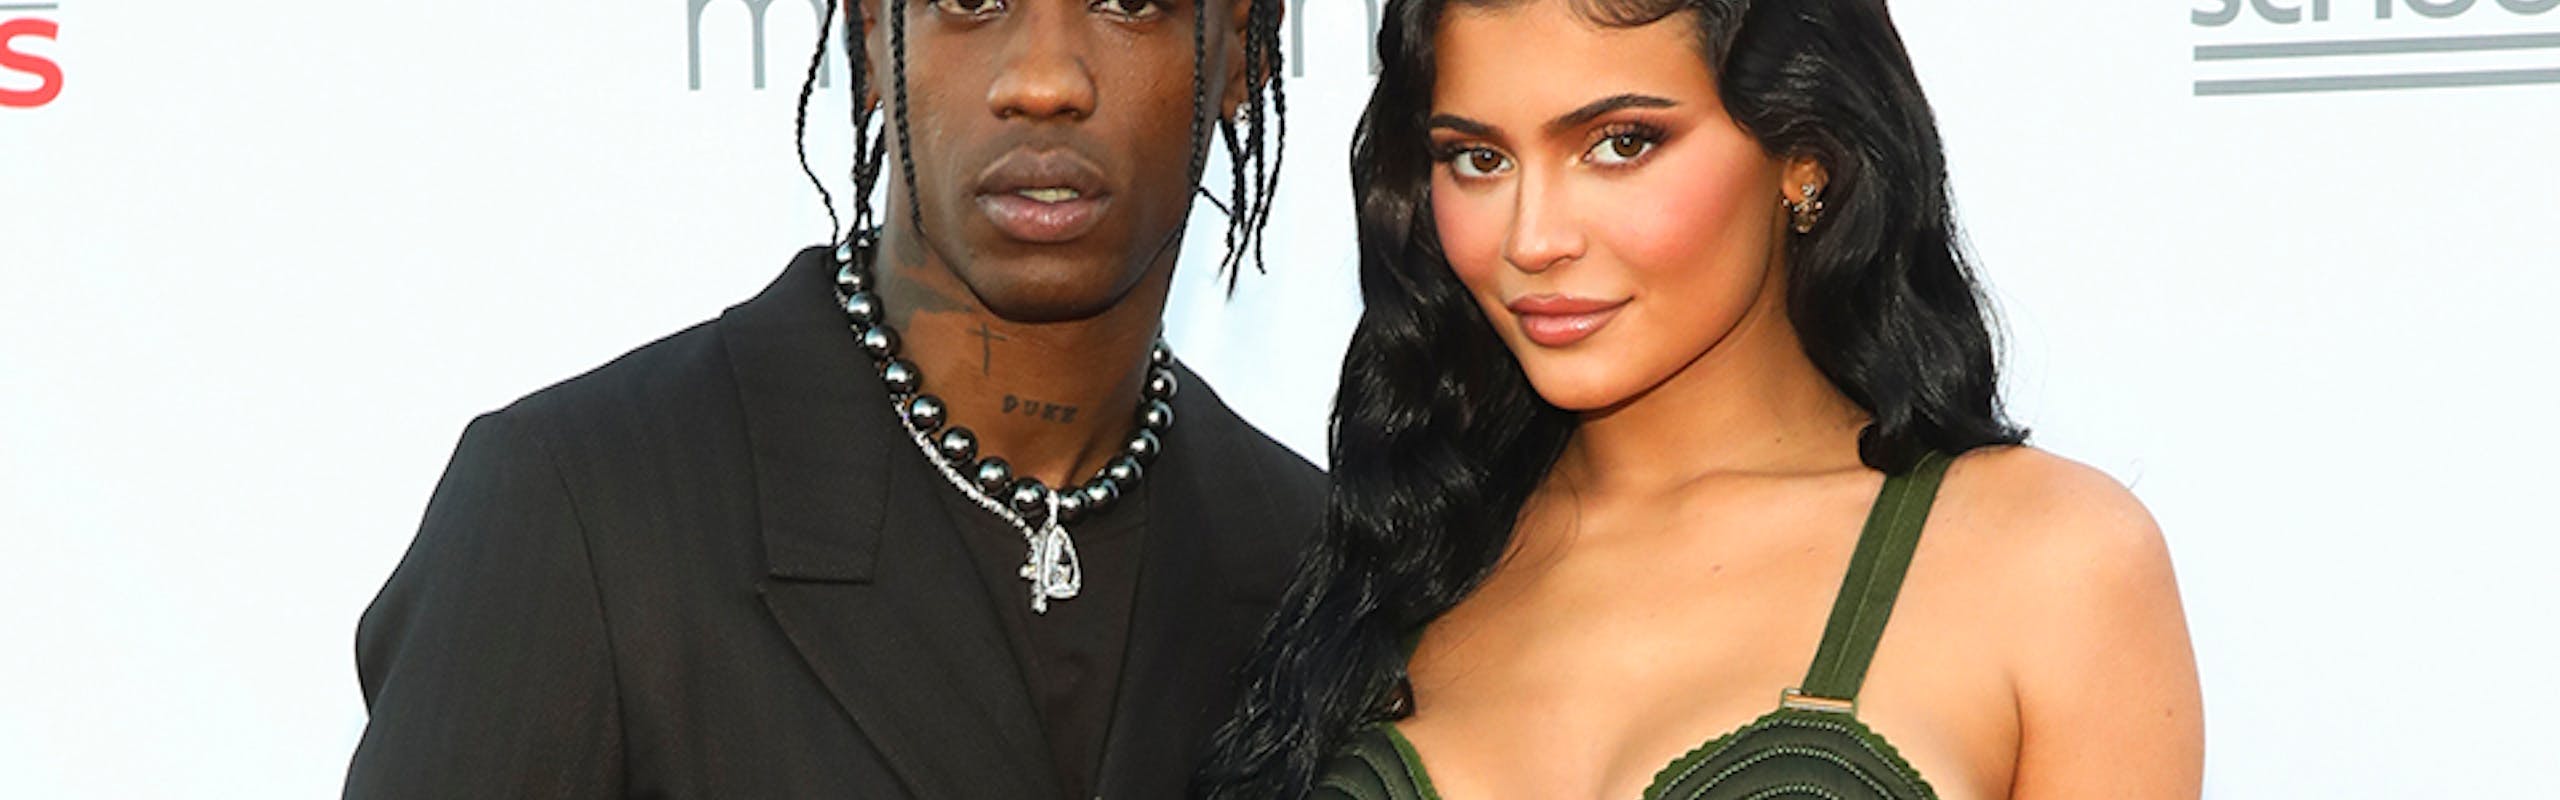 Travis Scott and Kylie Jenner pose for a photo on the red carpet. 